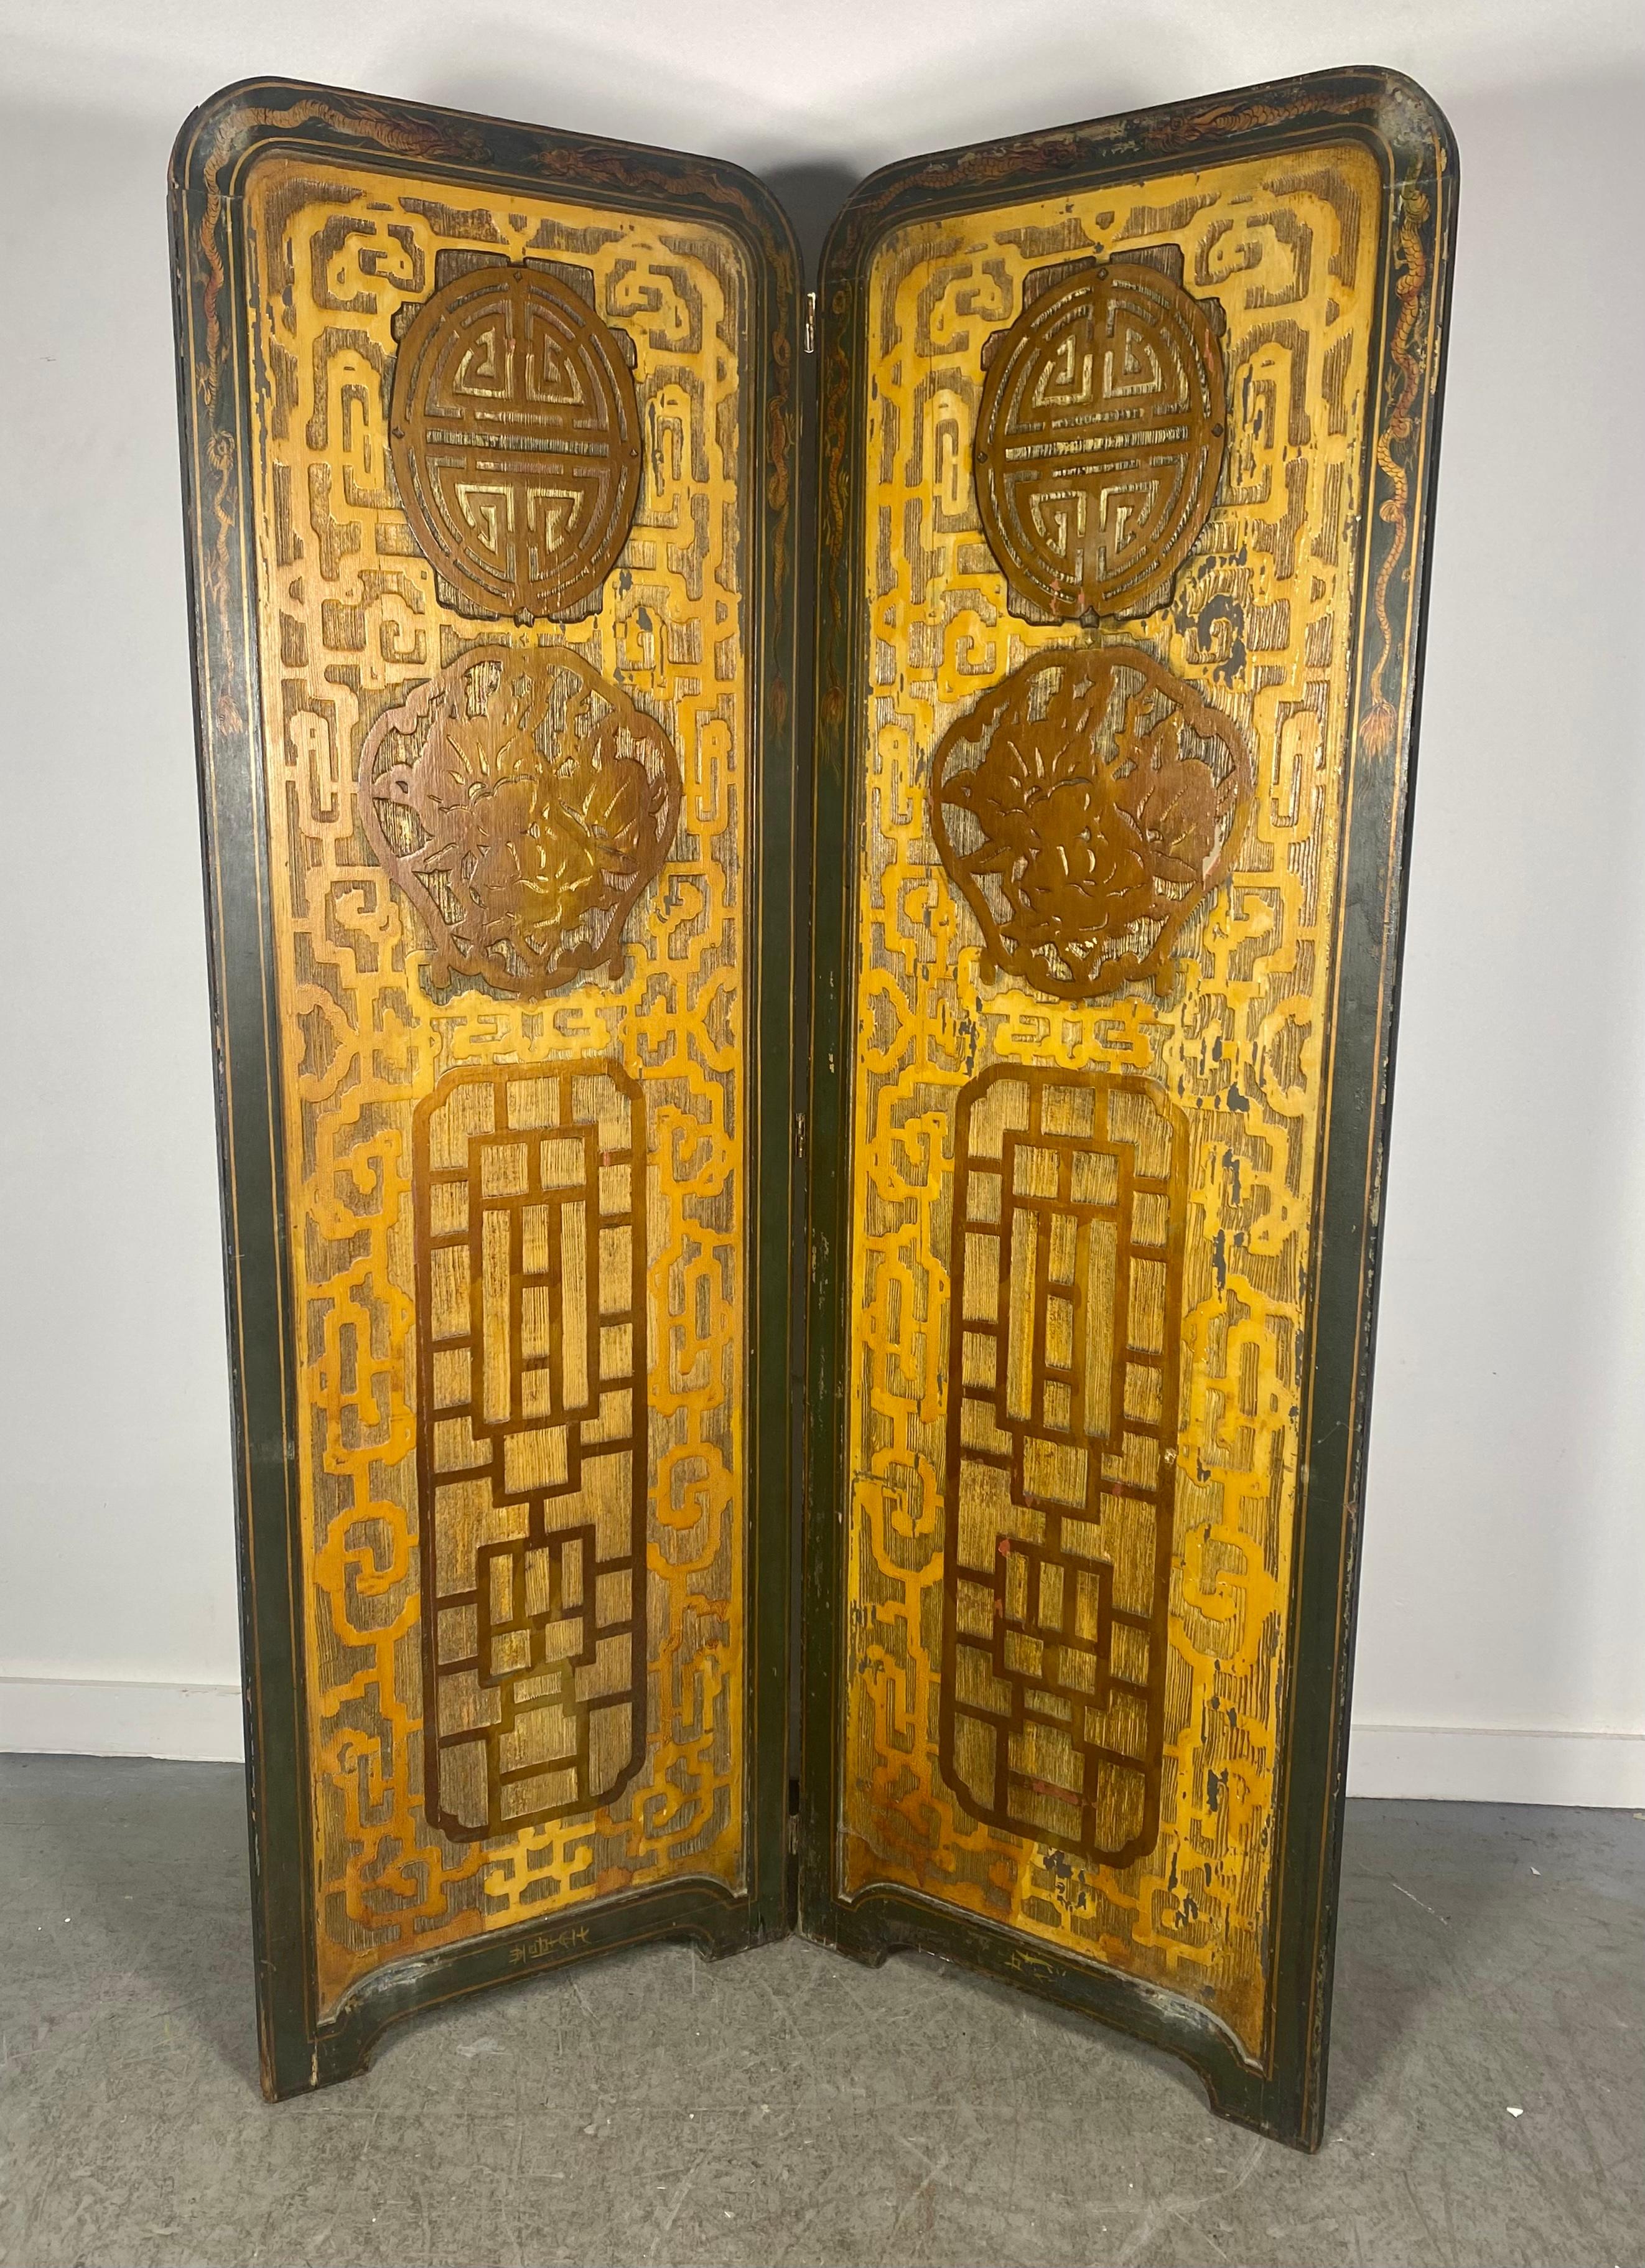  Asian Modernist / Chinese carved & hand painted two-panel screen , room divider.Signed by the artist,, Age approbate wear consistent with use and age.. Hand delivery avail to New York City or anywhere en route from Buffalo NY